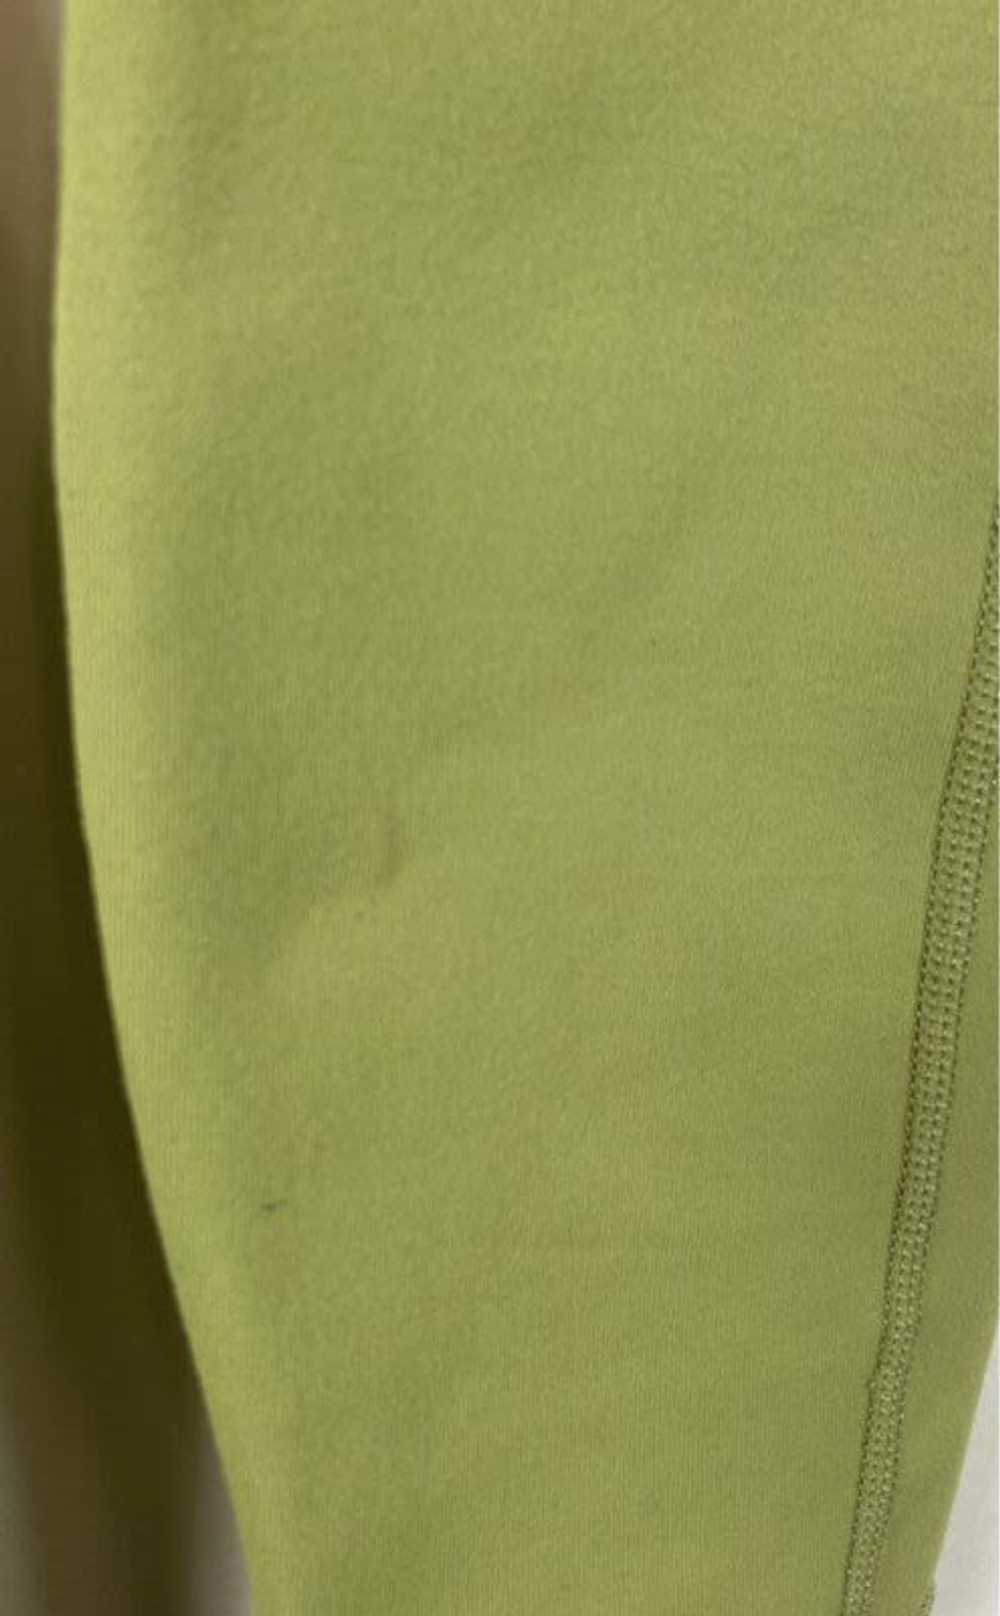 Fabletics Green Pants - Size X Small NWT - image 3